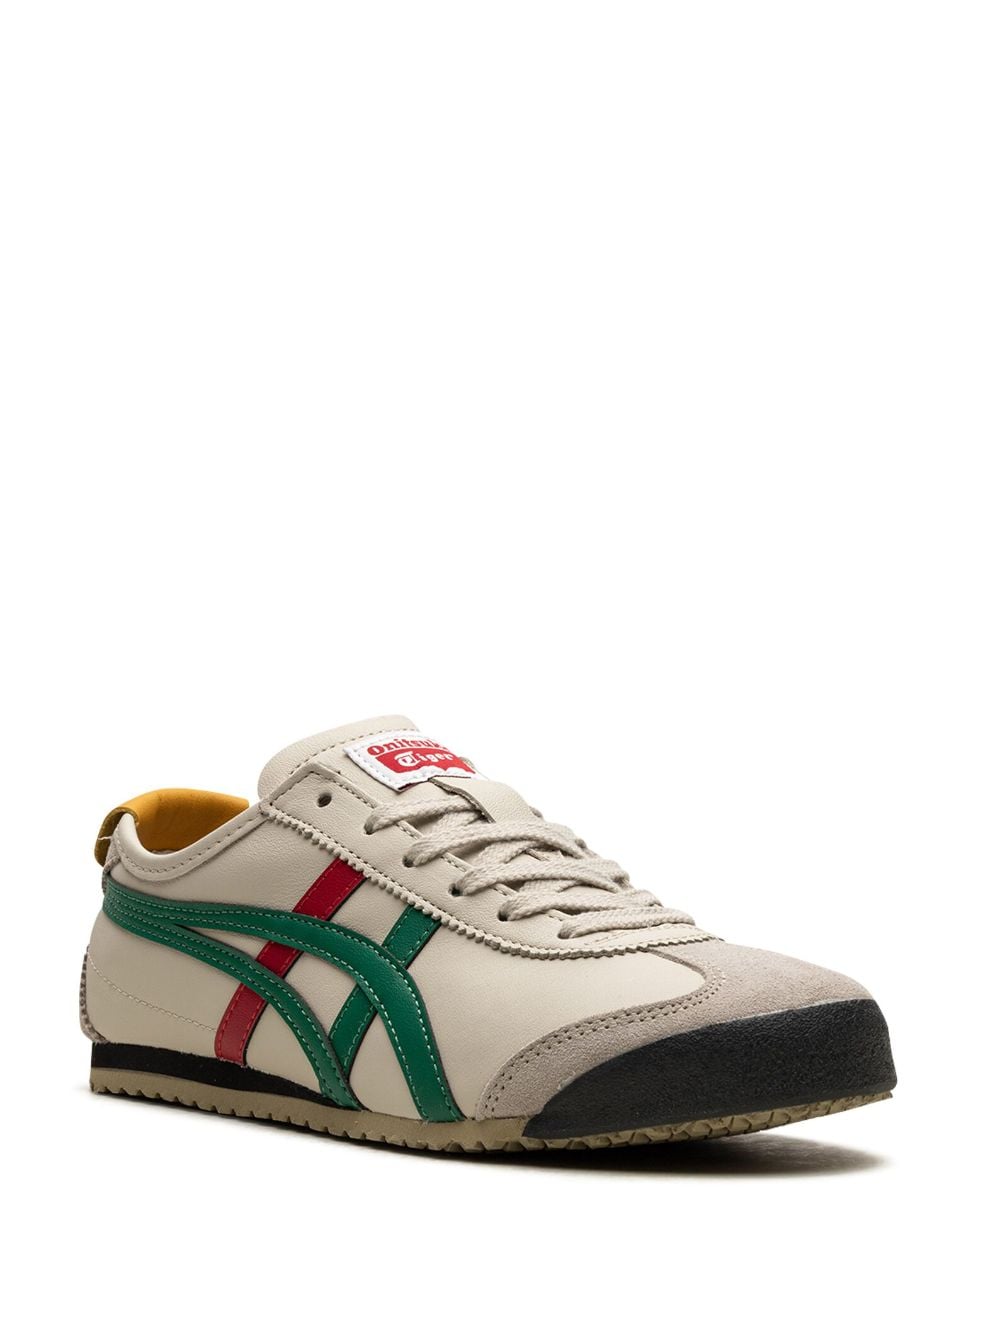 Image 2 of Onitsuka Tiger "Mexico 66™ ""Birch/Green"" sneakers"